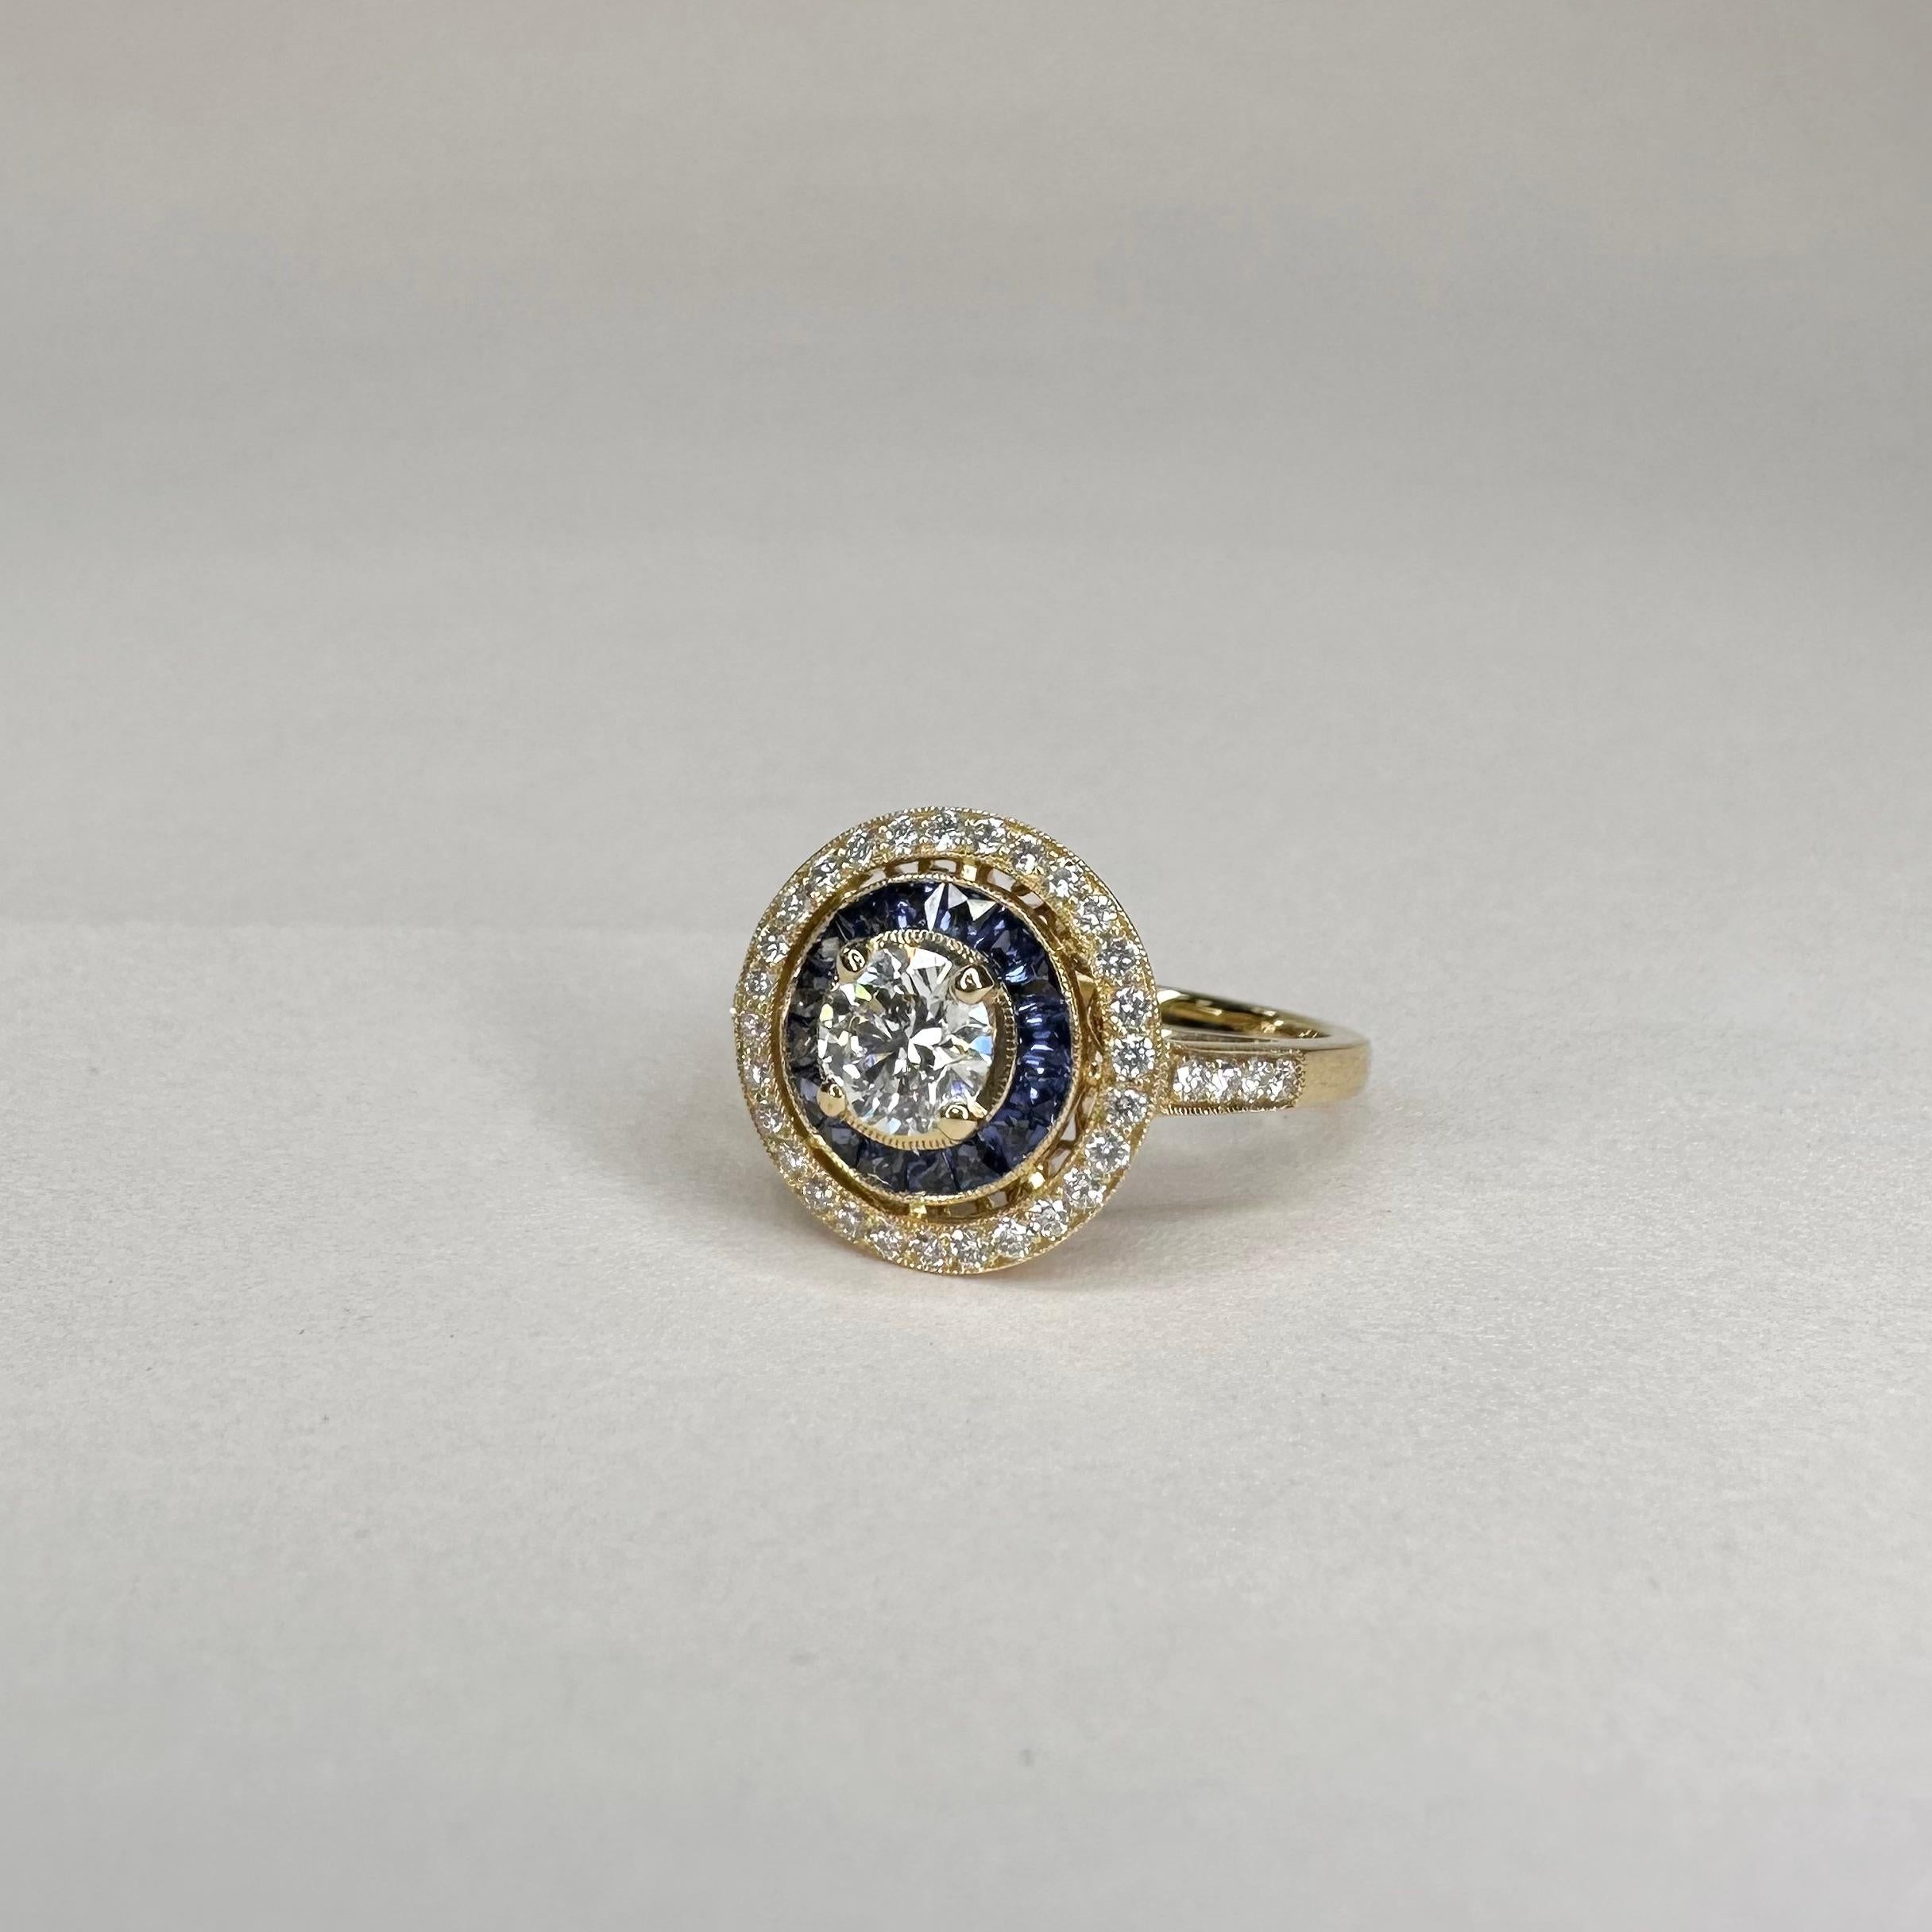 For Sale:  Art Deco Style 18k Yellow Gold Calibre Cut Sapphire Ring With 0.75 Ct Diamond 5